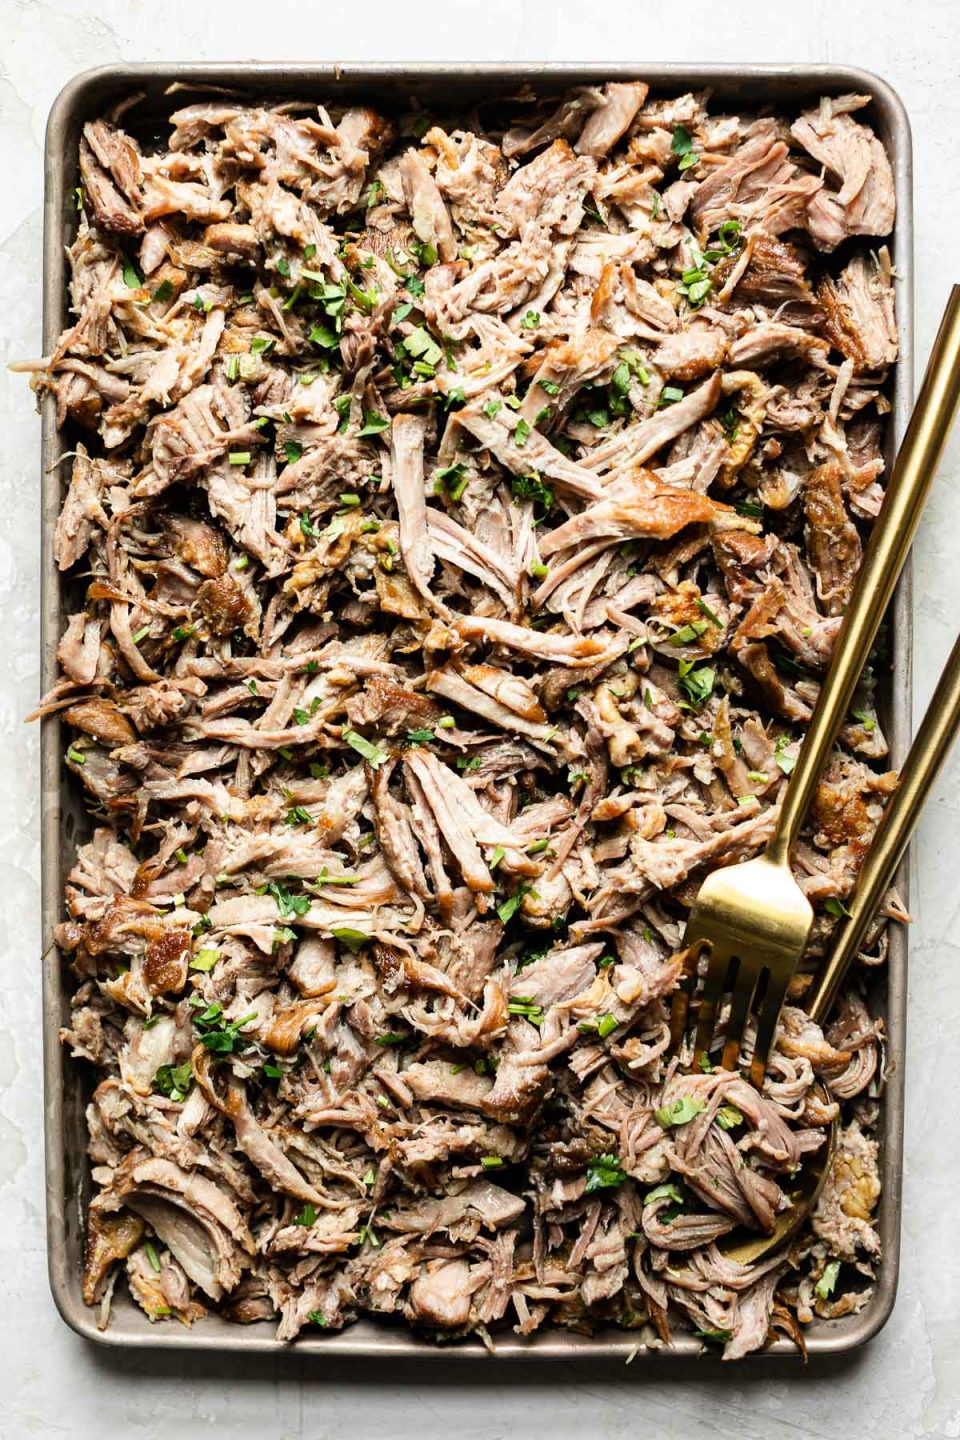 Shredded kalua pork on a small baking sheet, topped with cilantro. A gold serving fork & spoon are nestled in the pork.